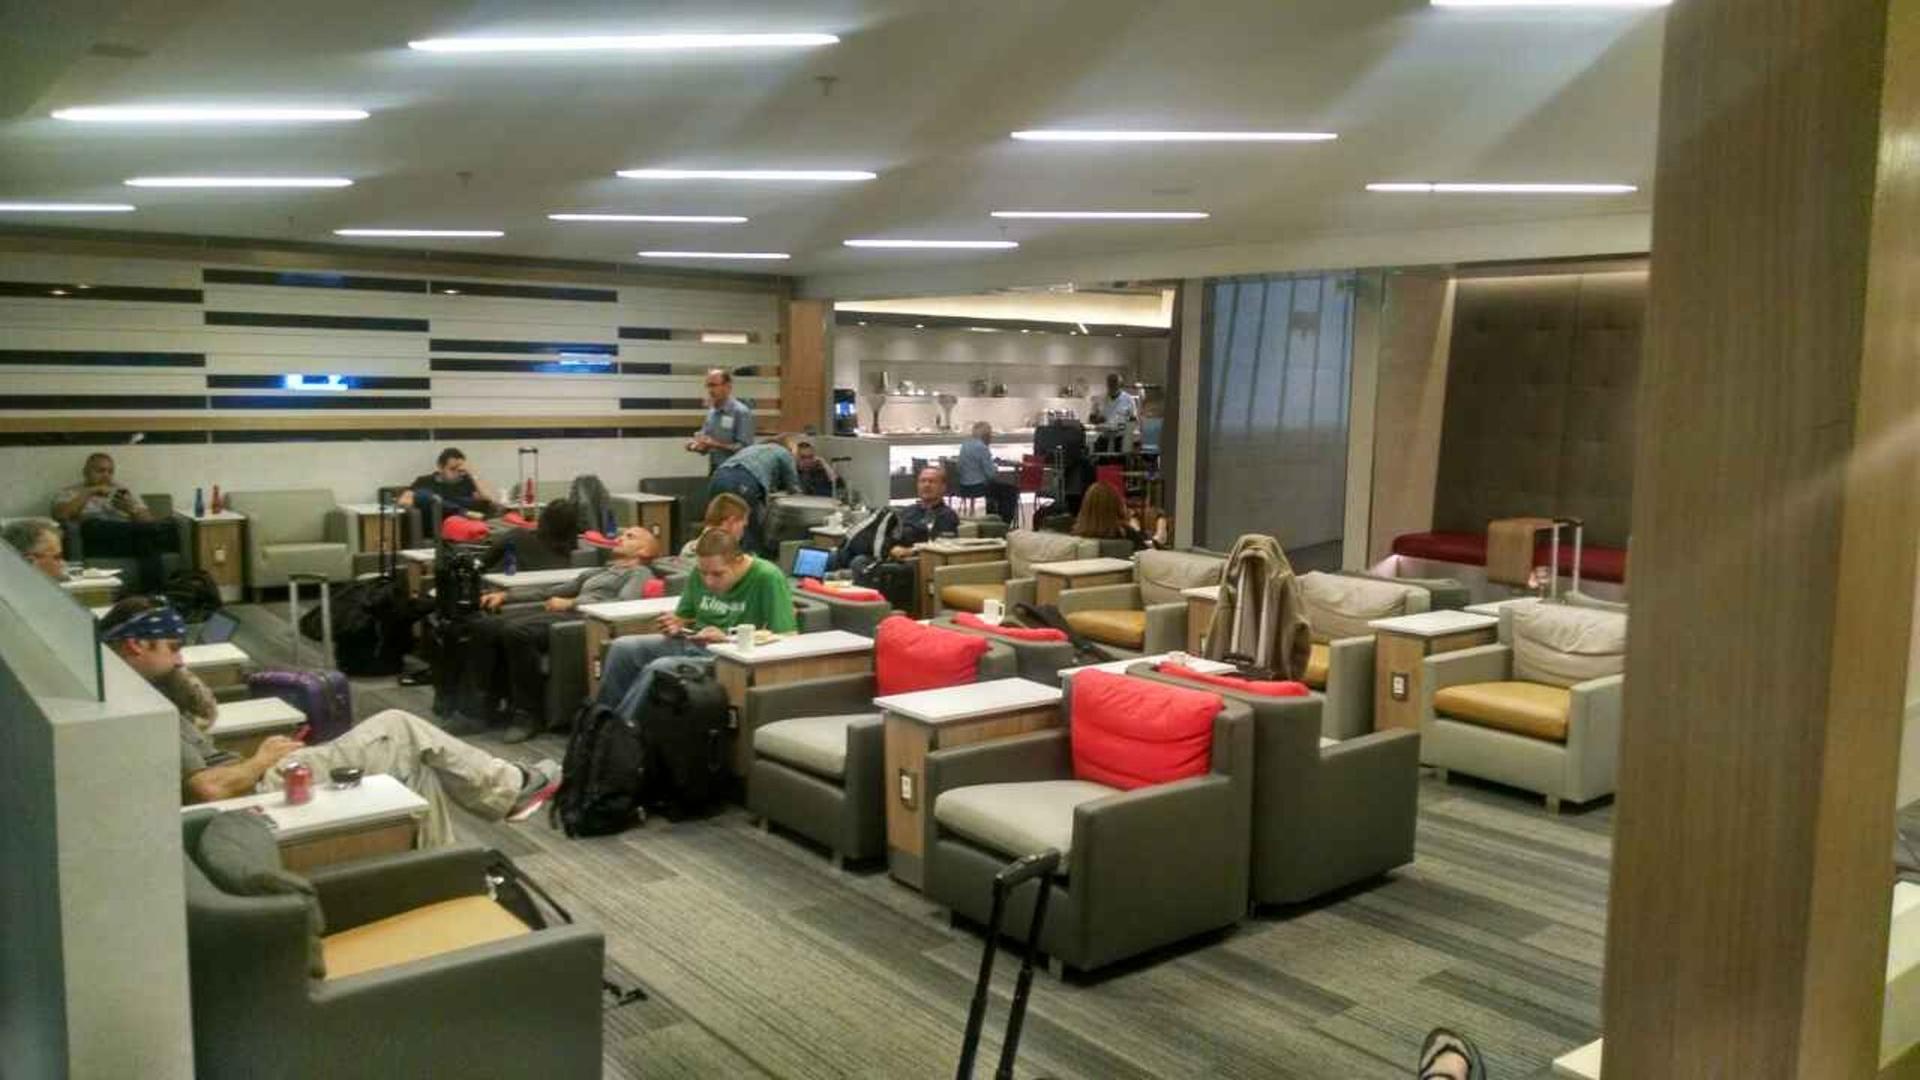 American Airlines Admirals Club image 17 of 30